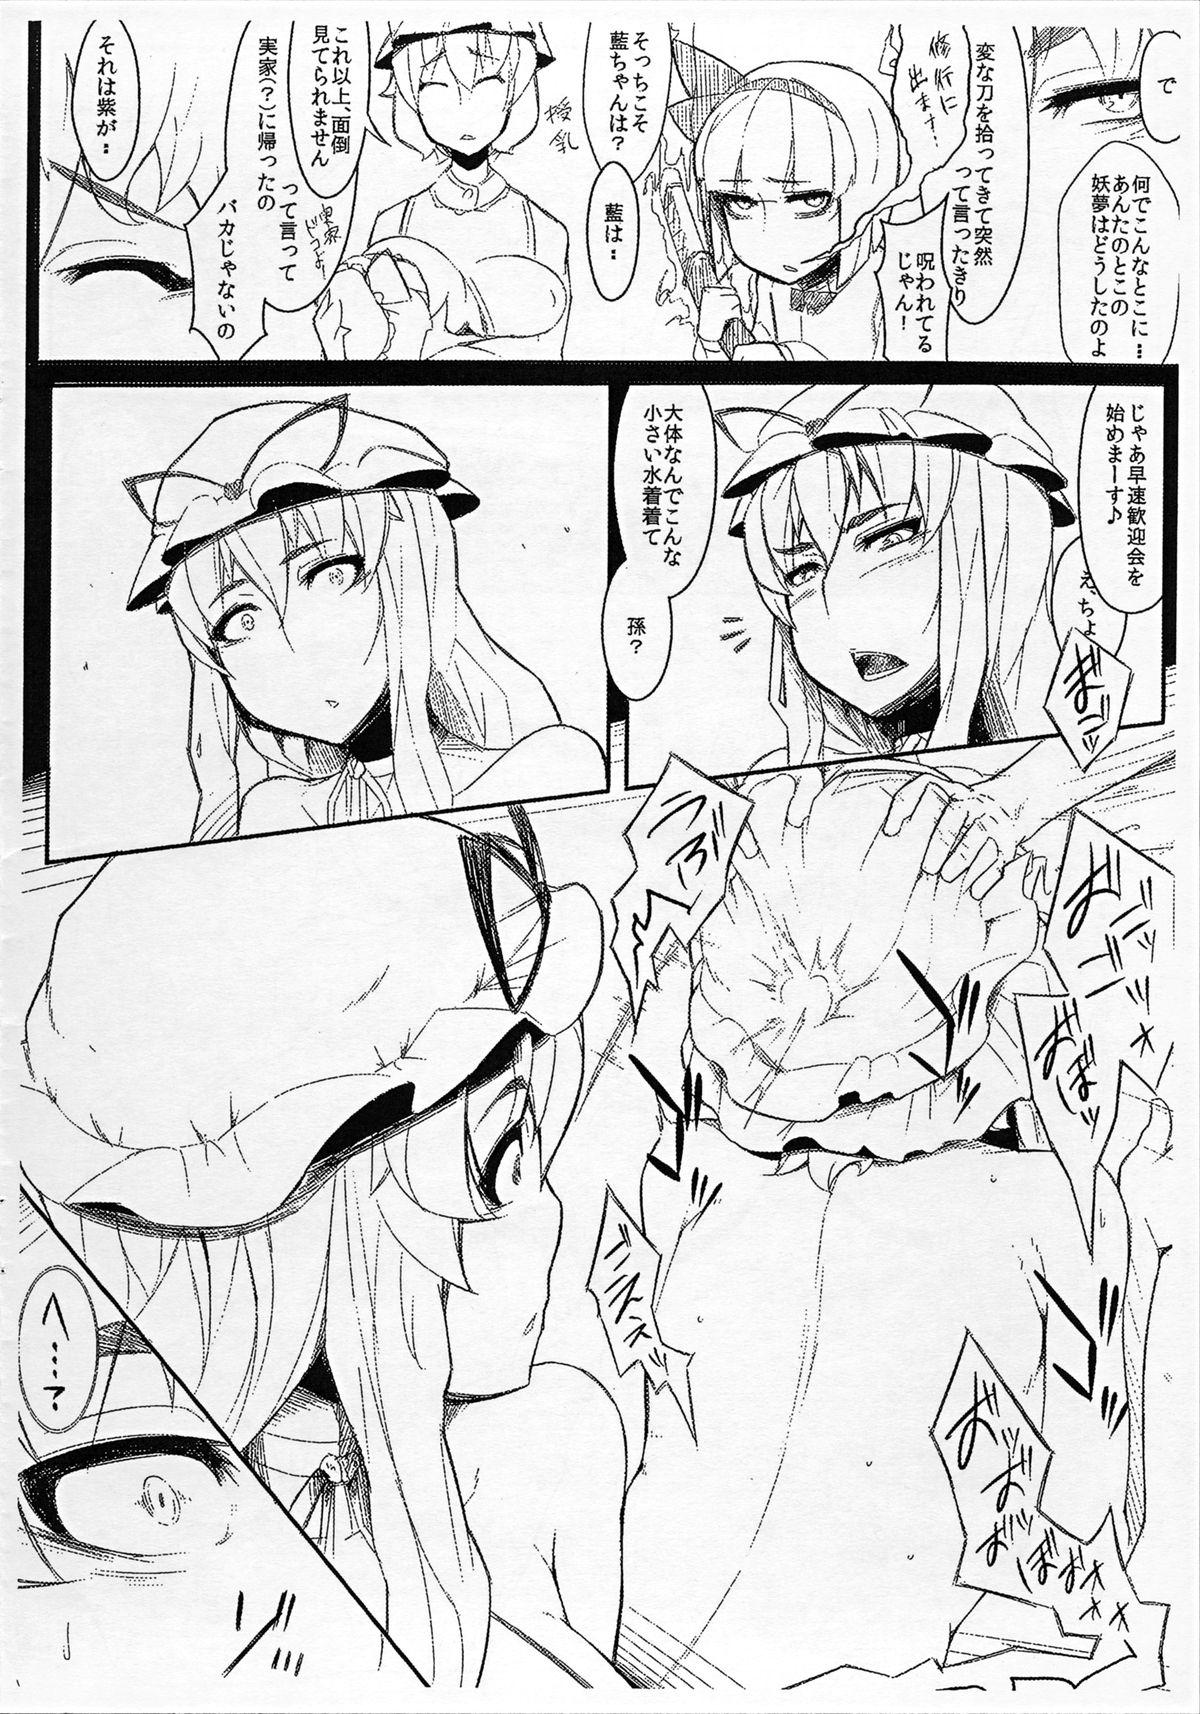 Exhibitionist Toshimaen e Youkoso Vol. 0 - Touhou project Latex - Page 3